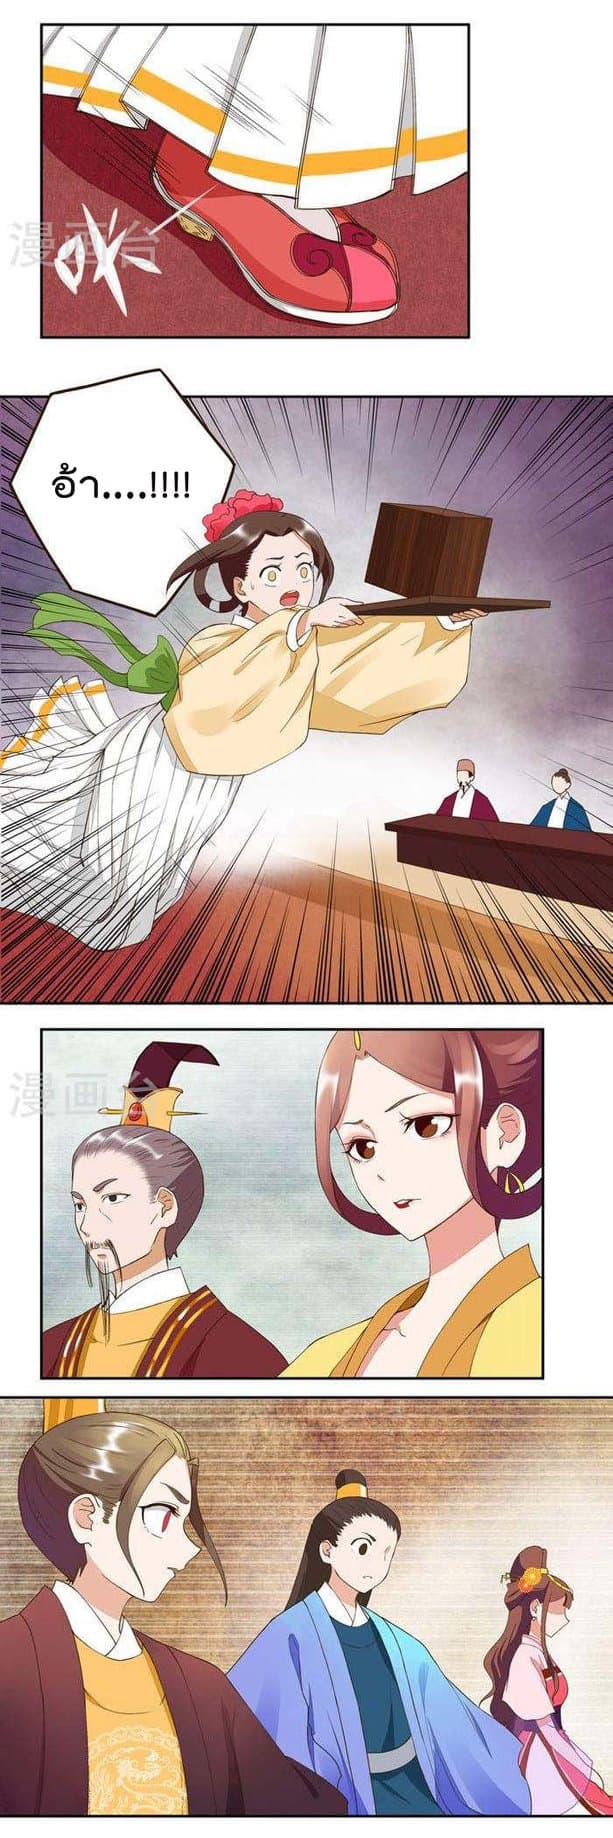 The Bloody Merchant Empress and the Cold Husband s Forceful Doting - หน้า 8